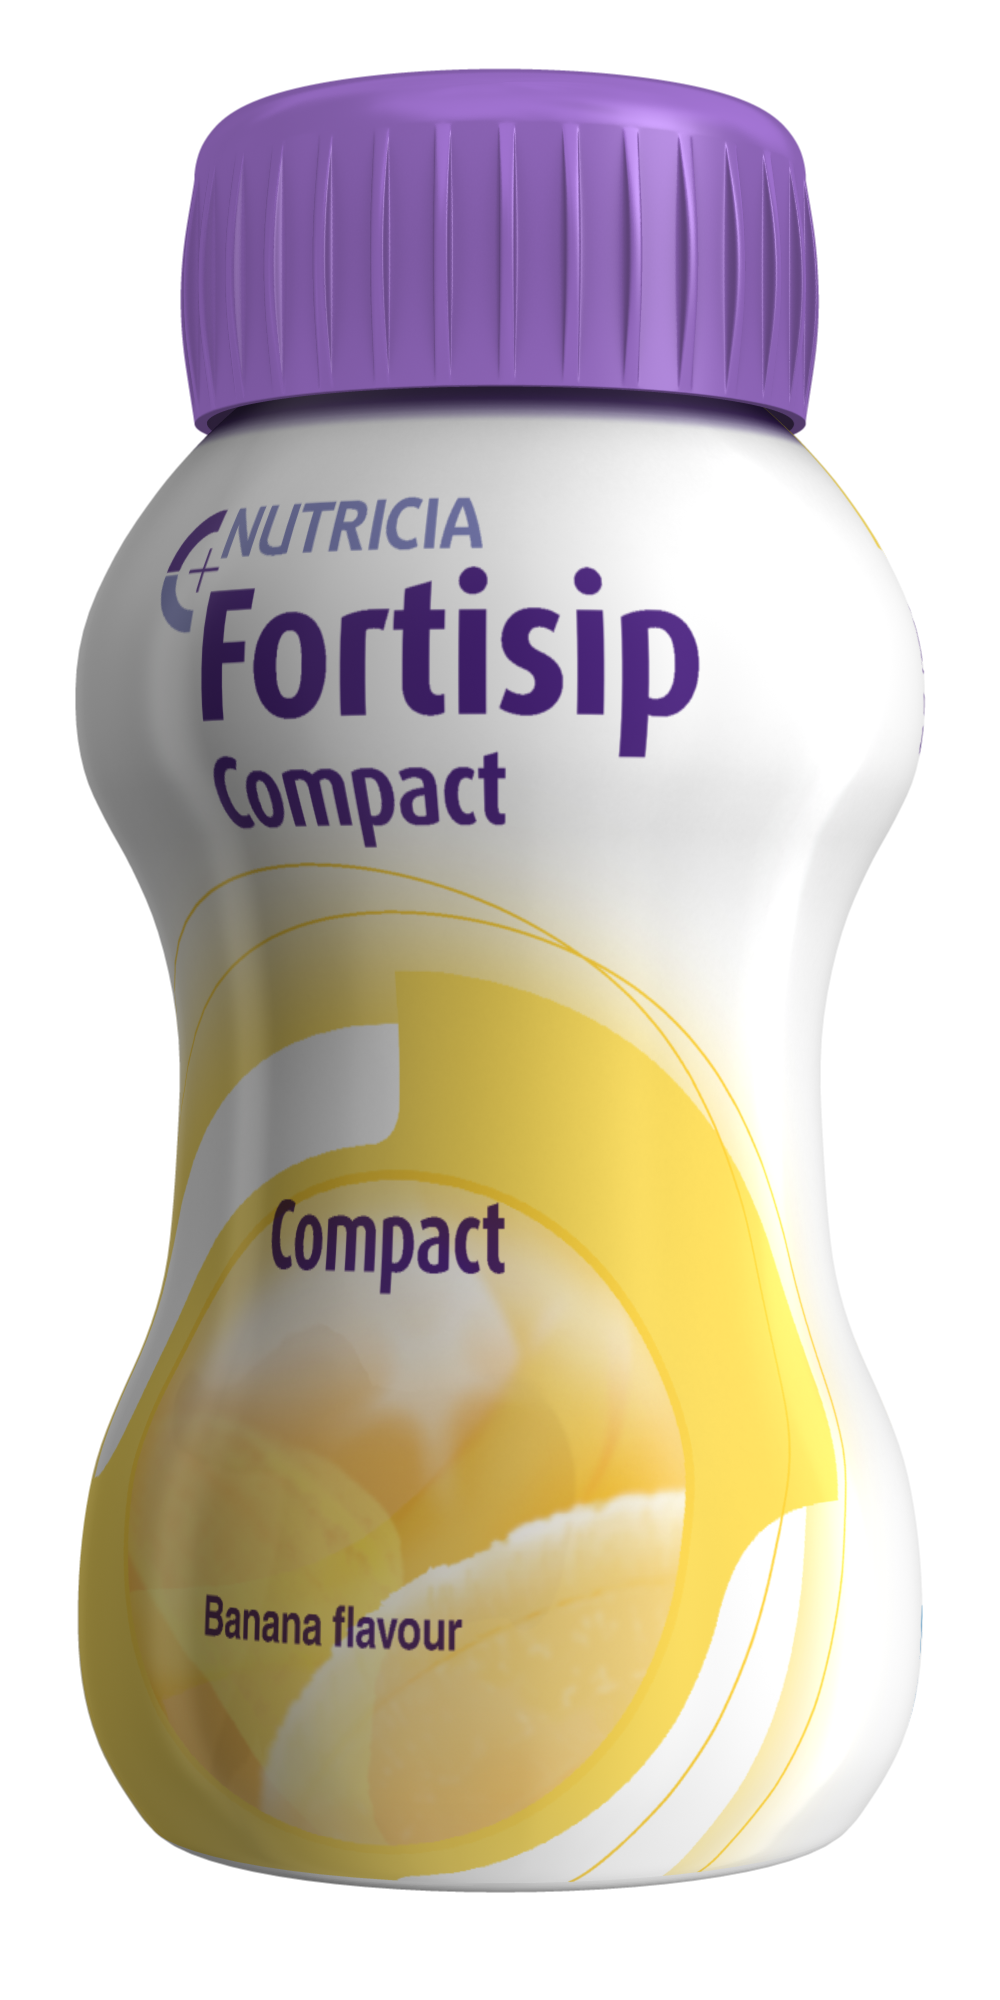 Fortisip Compact